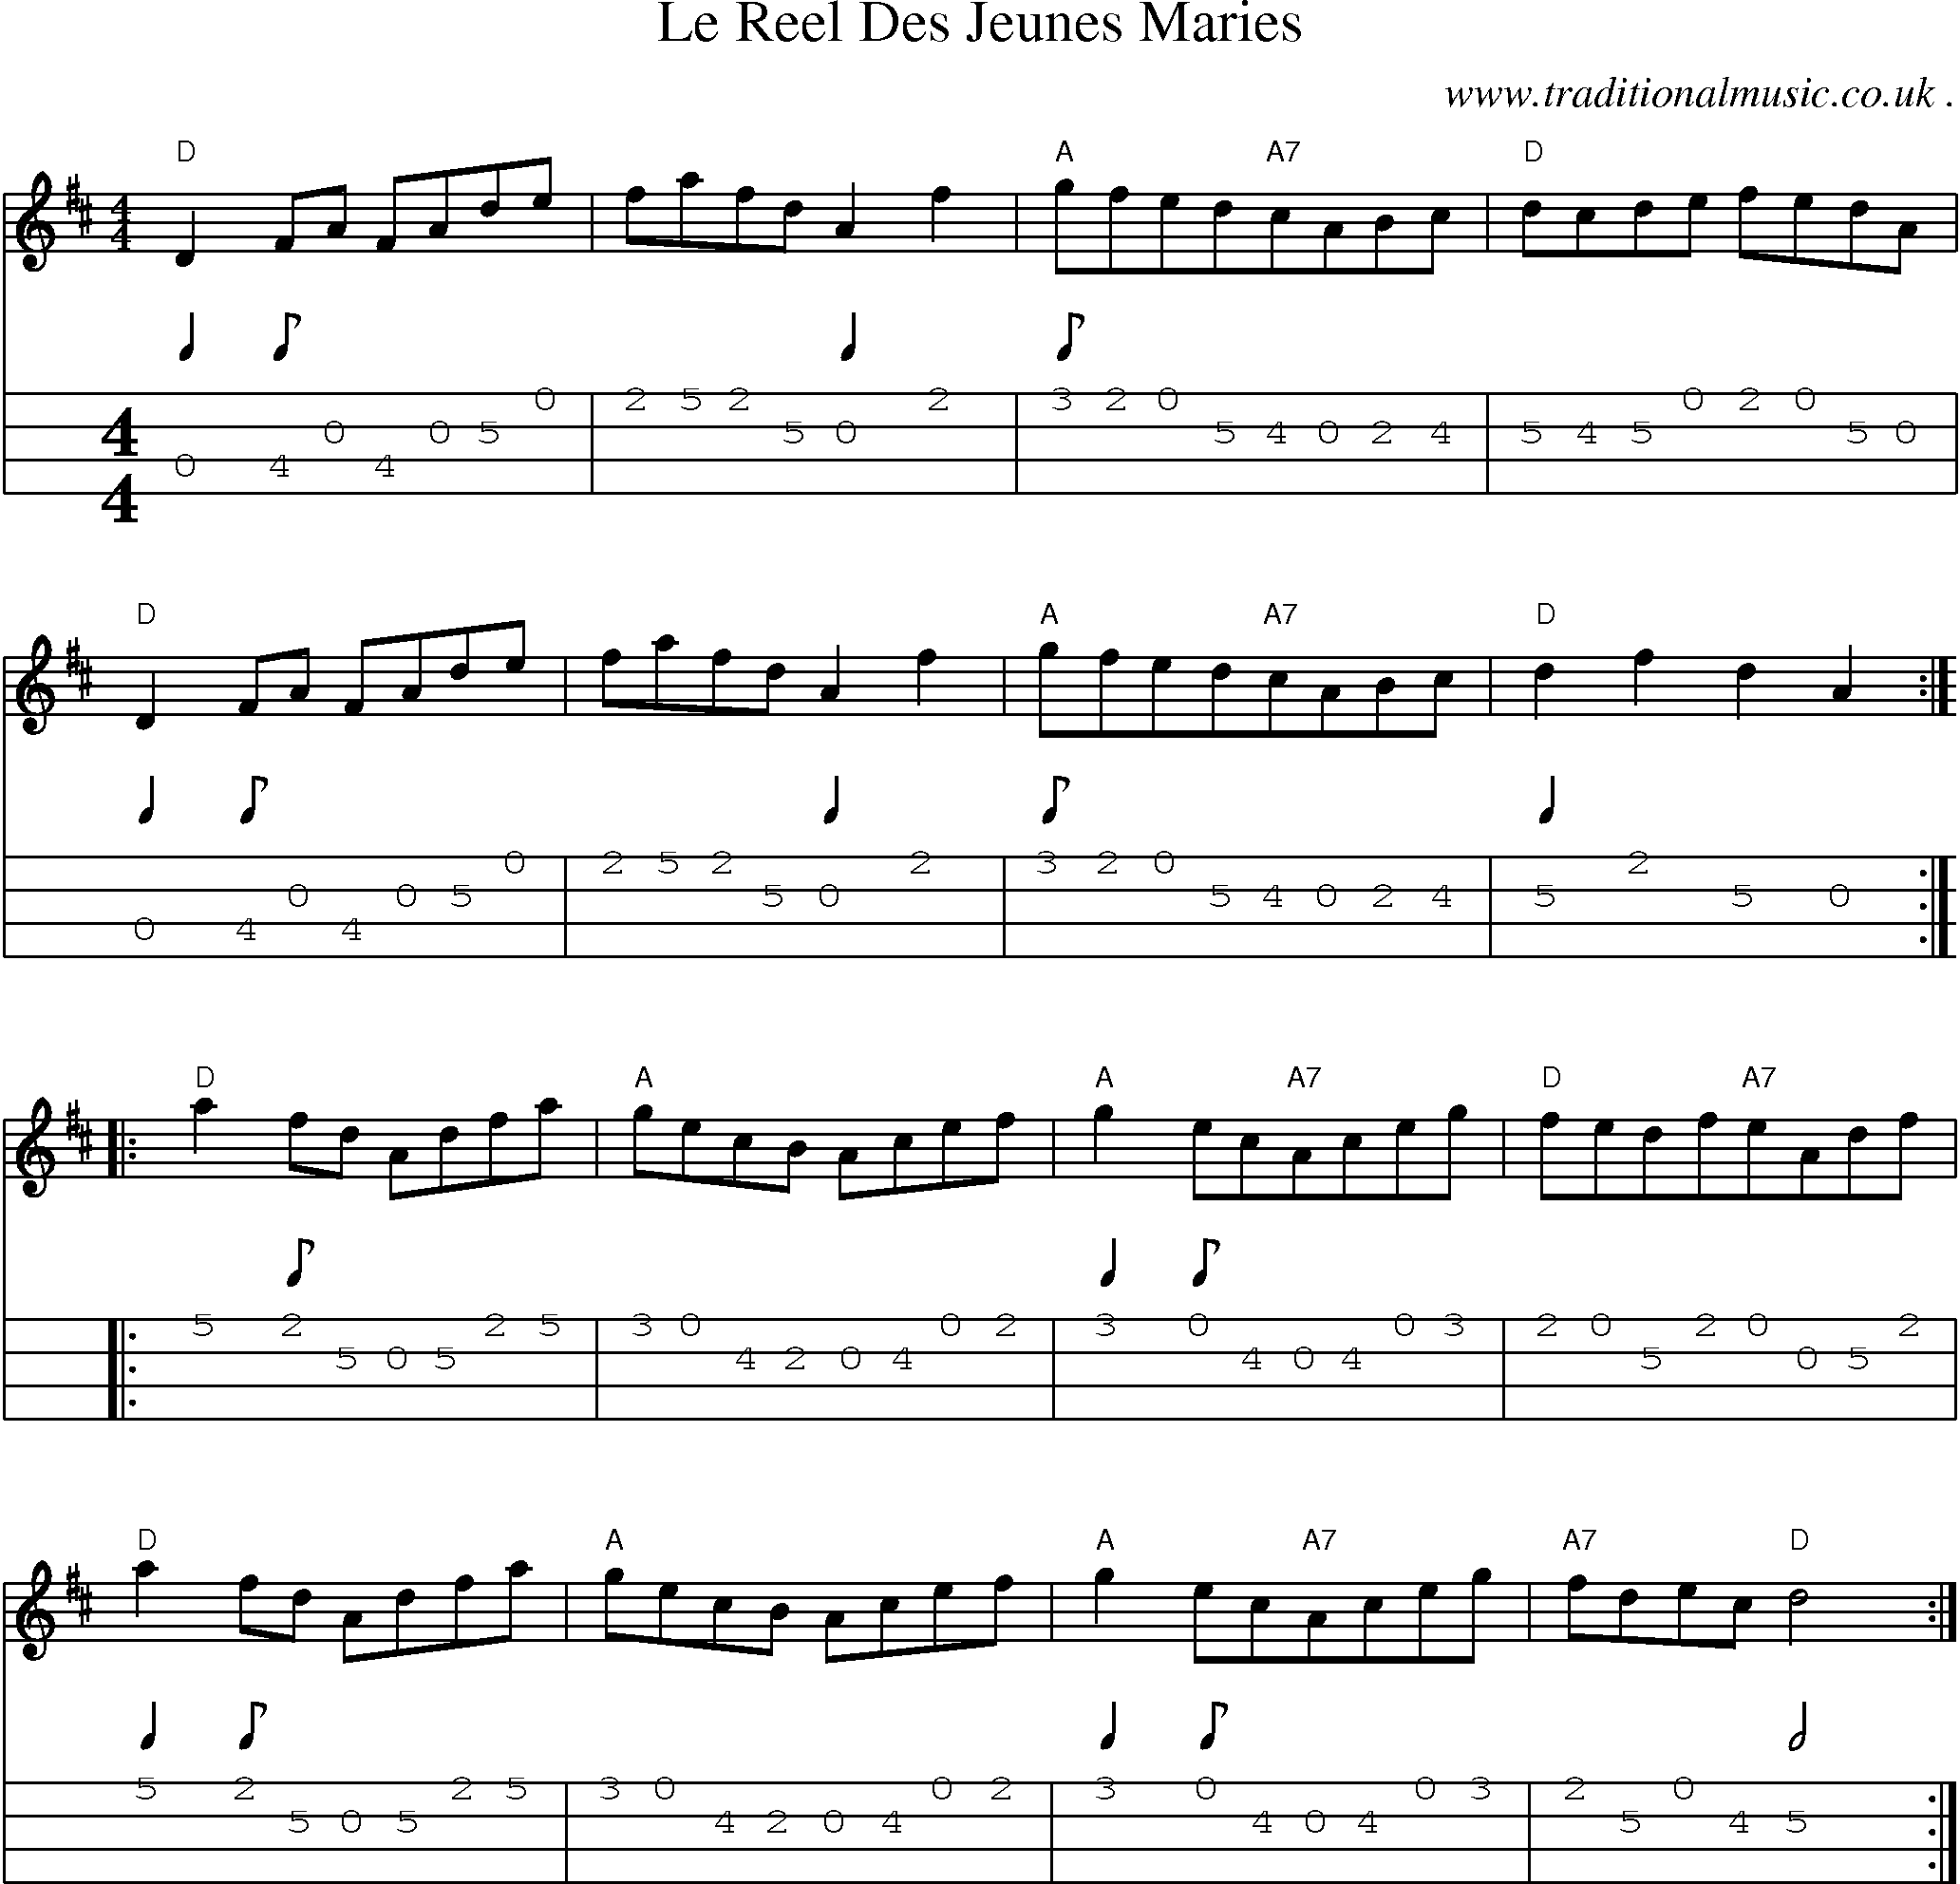 Sheet-Music and Mandolin Tabs for Le Reel Des Jeunes Maries